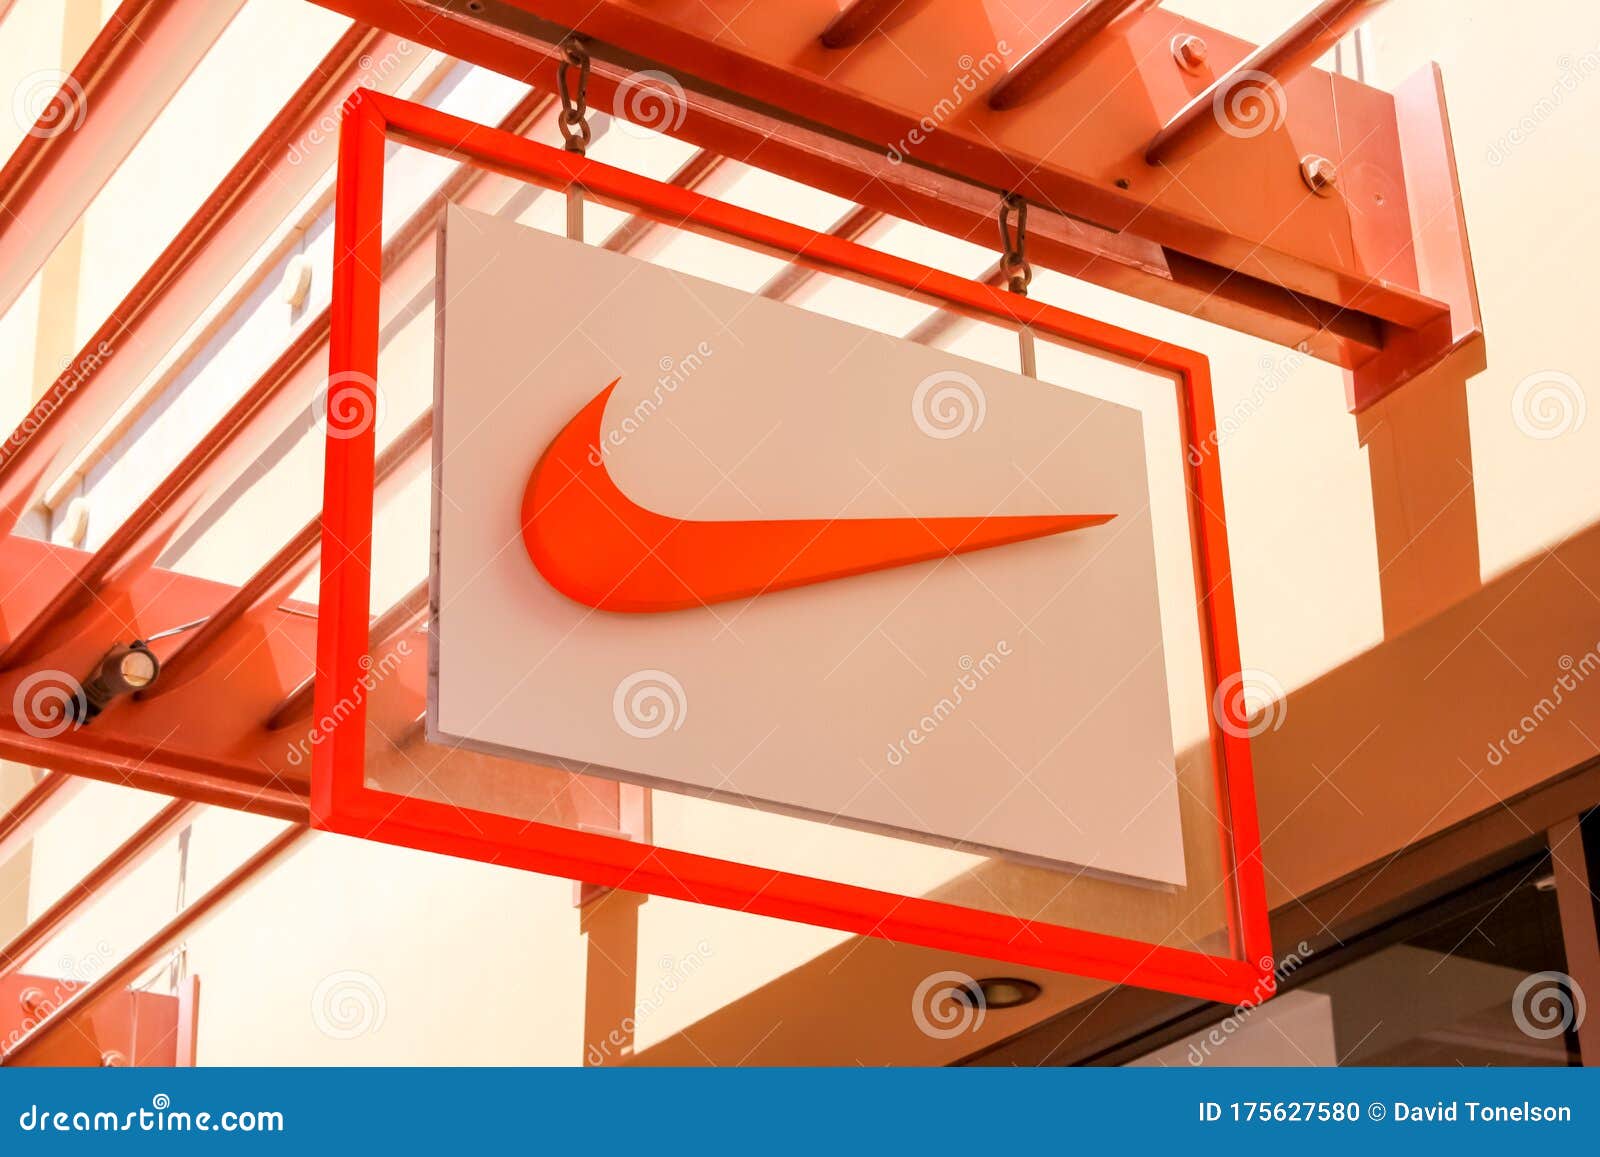 Anestésico Aprovechar Rebaño Nike sign editorial image. Image of indoor, product - 175627580